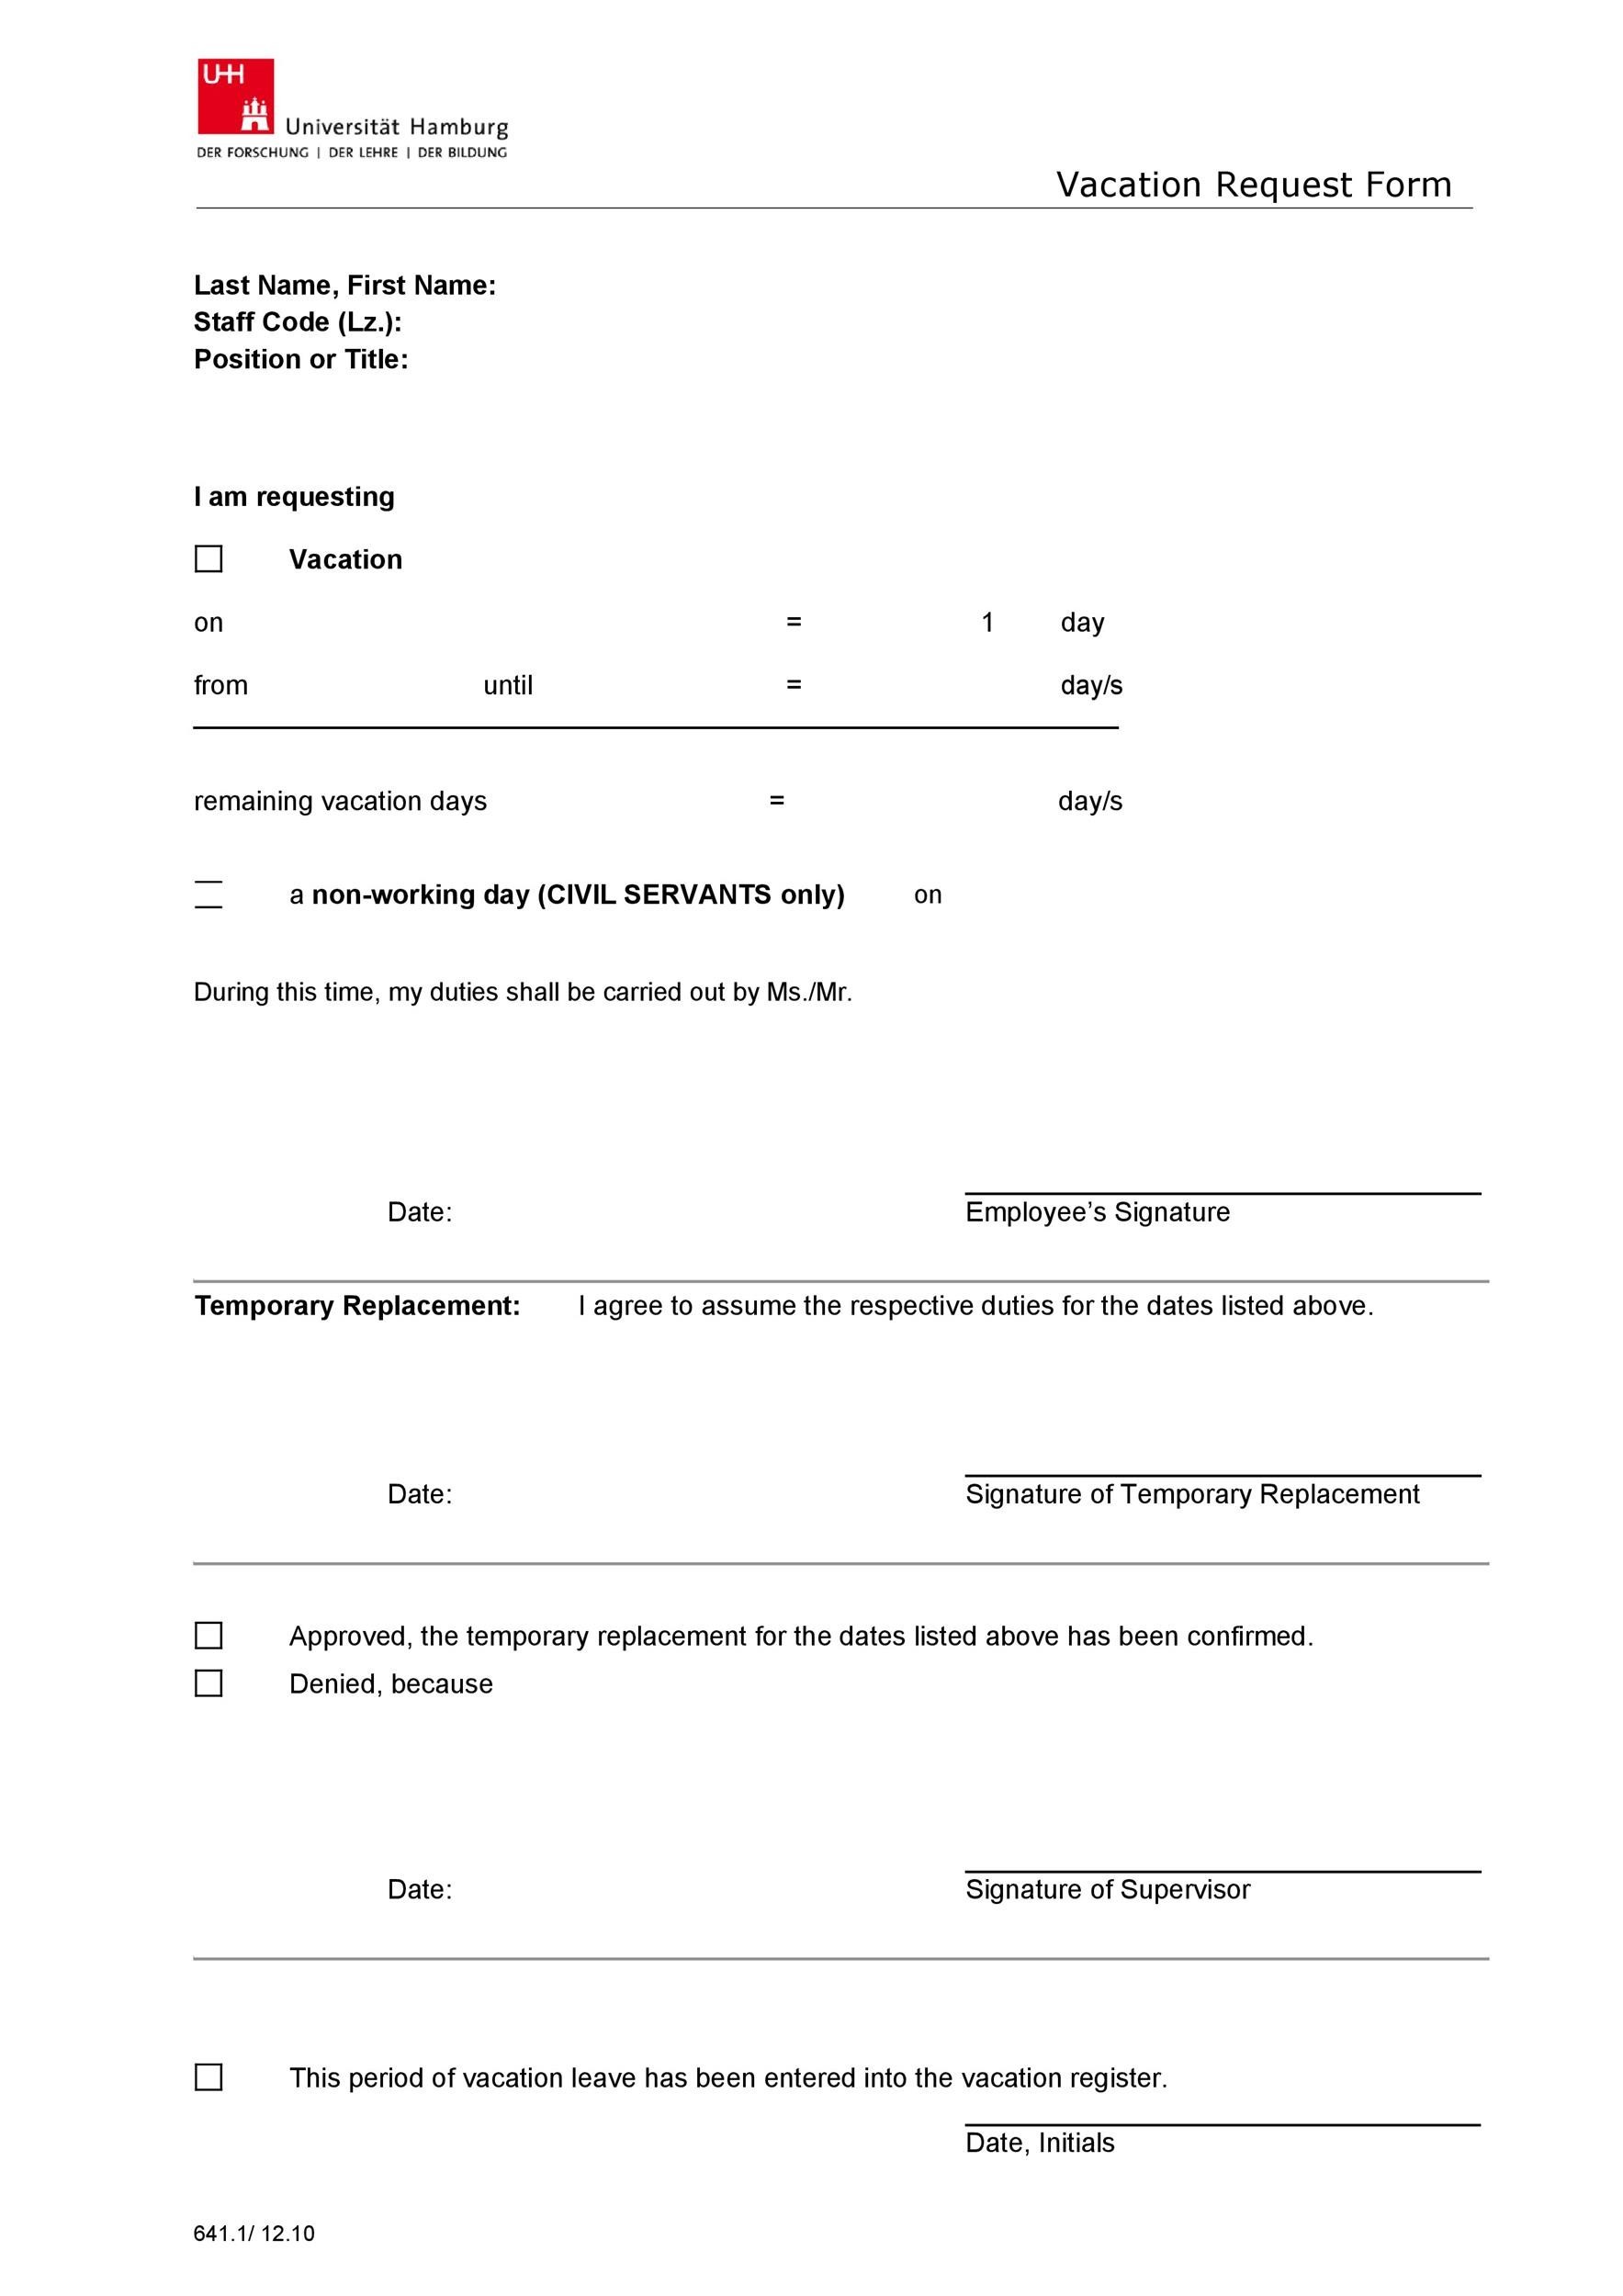 Free vacation request form 39